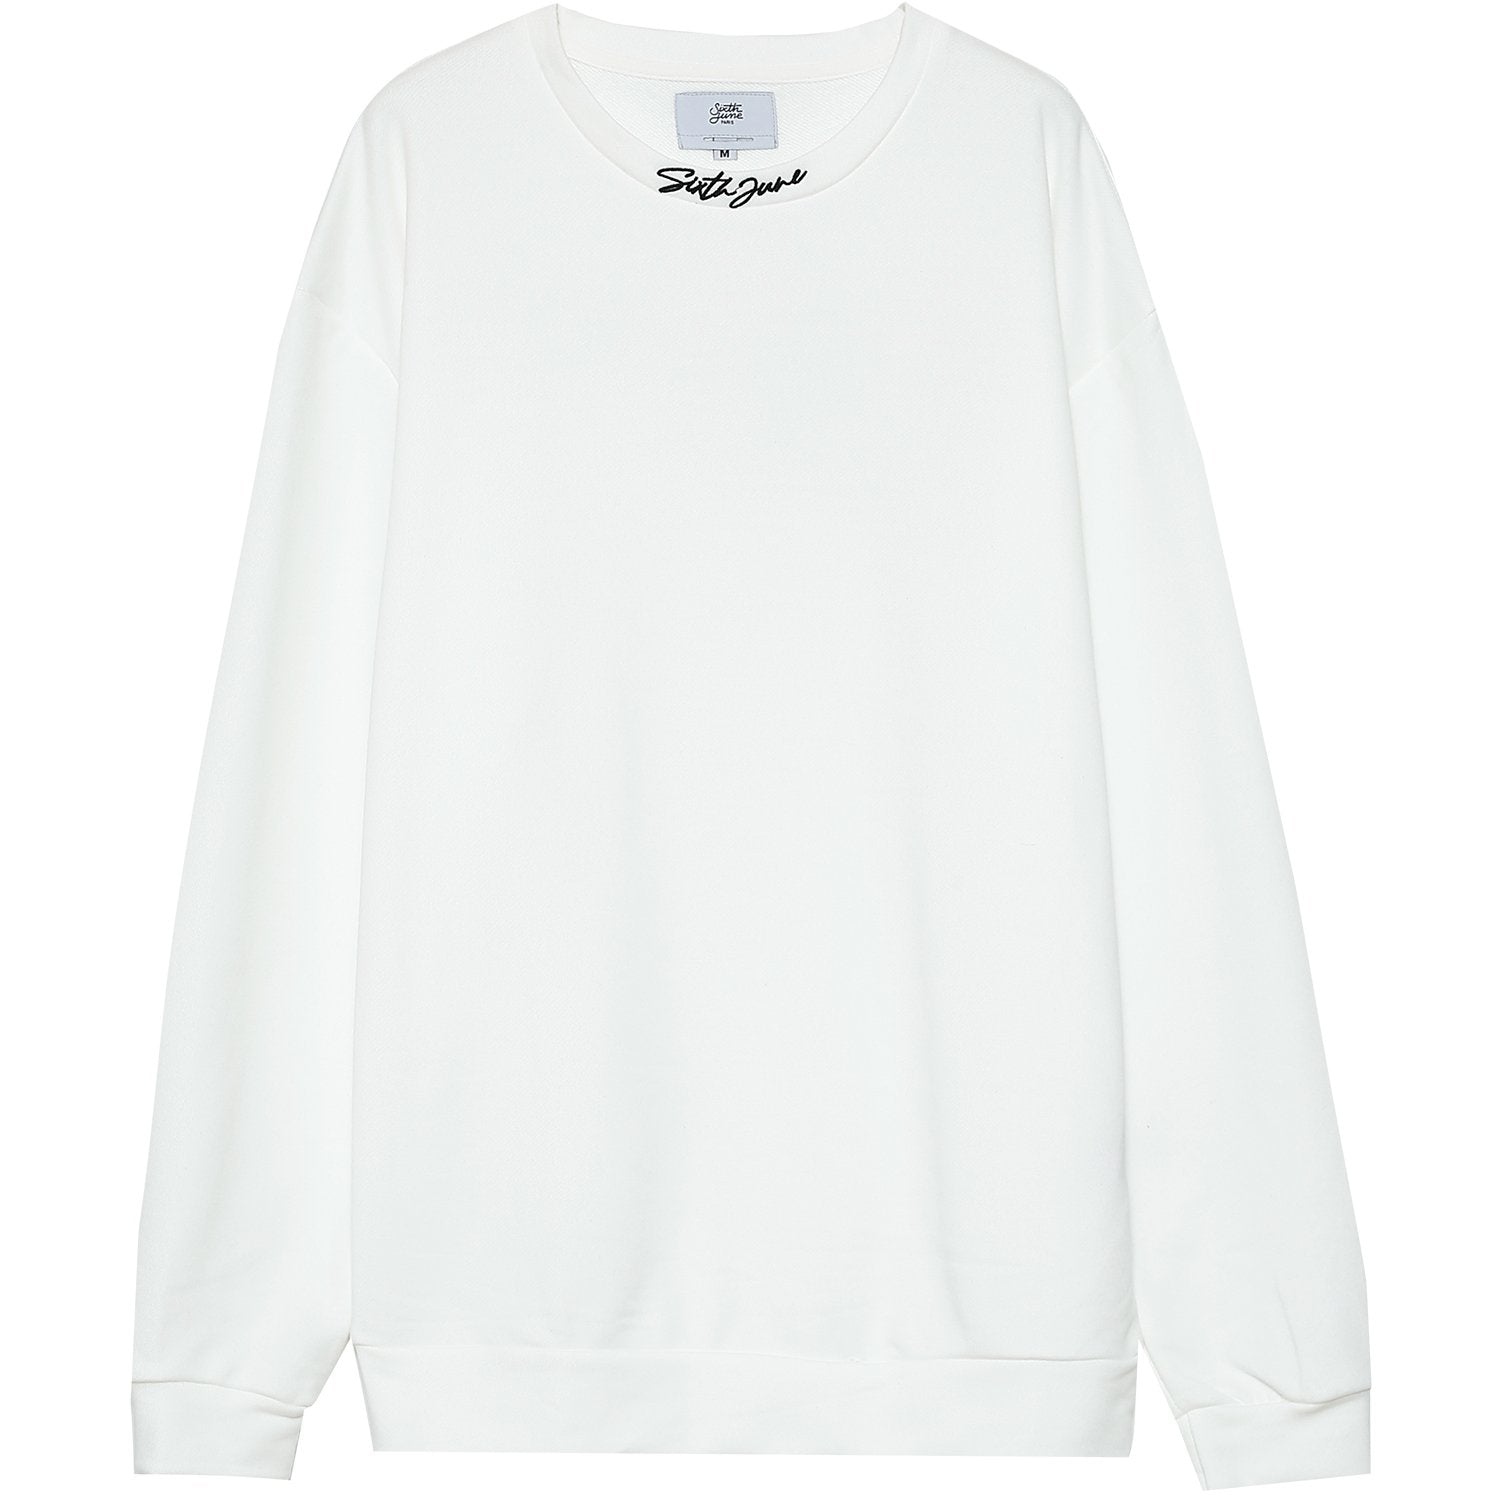 Youth Culture Matters sweater white